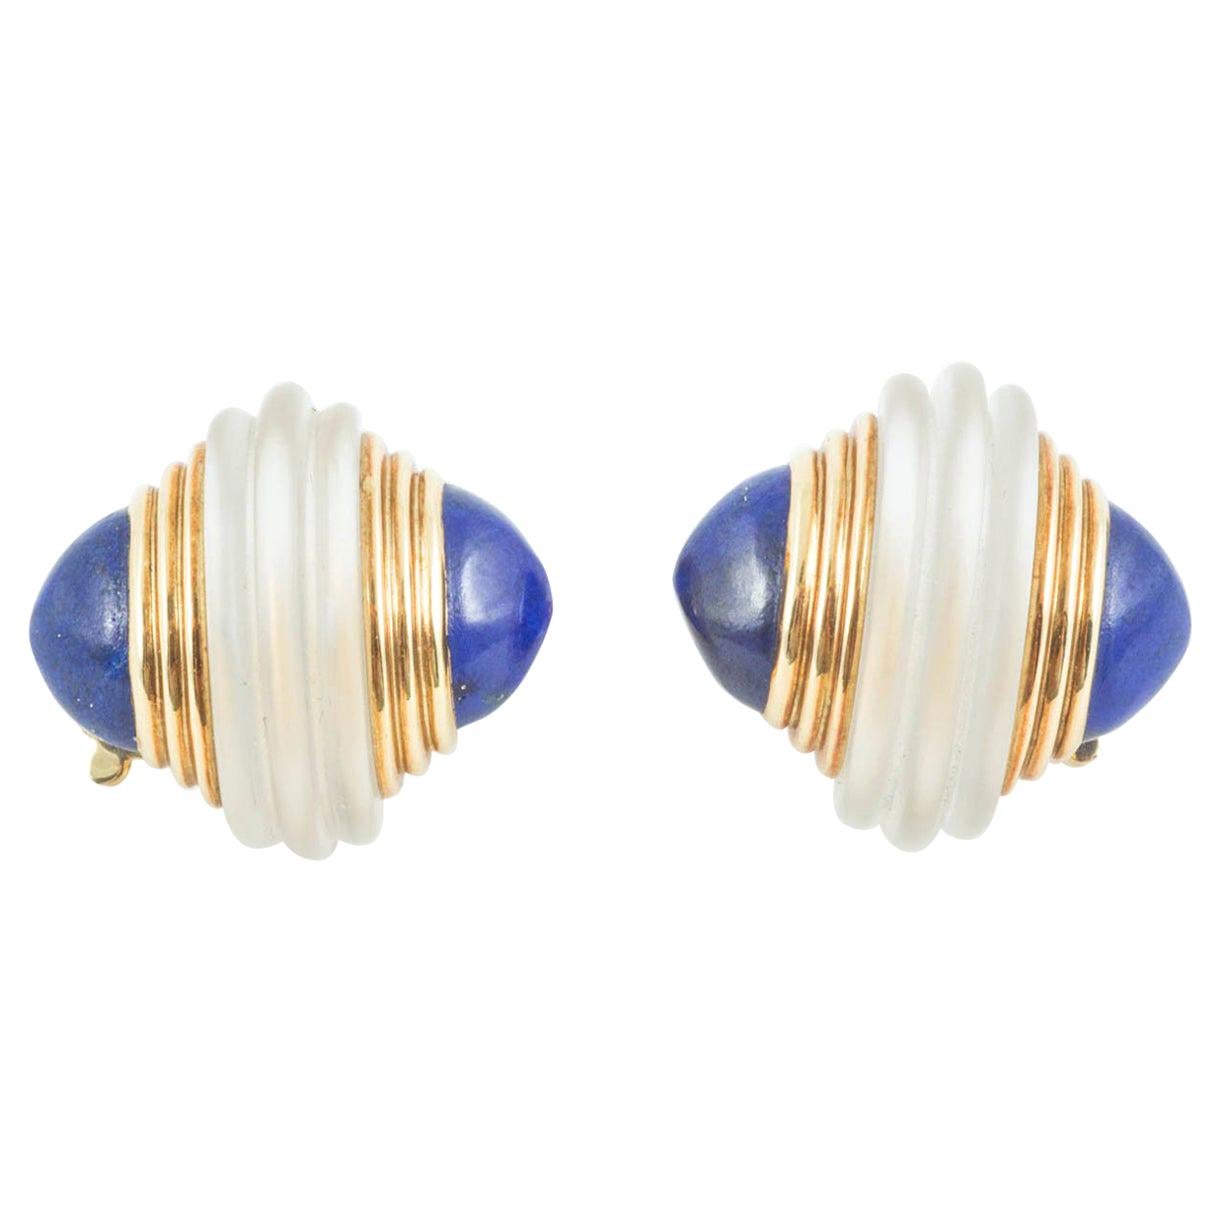 Boucheron Clip Earrings, Frosted Crystal & Lapis Lazuli in 18k Gold, French 1950 im Angebot